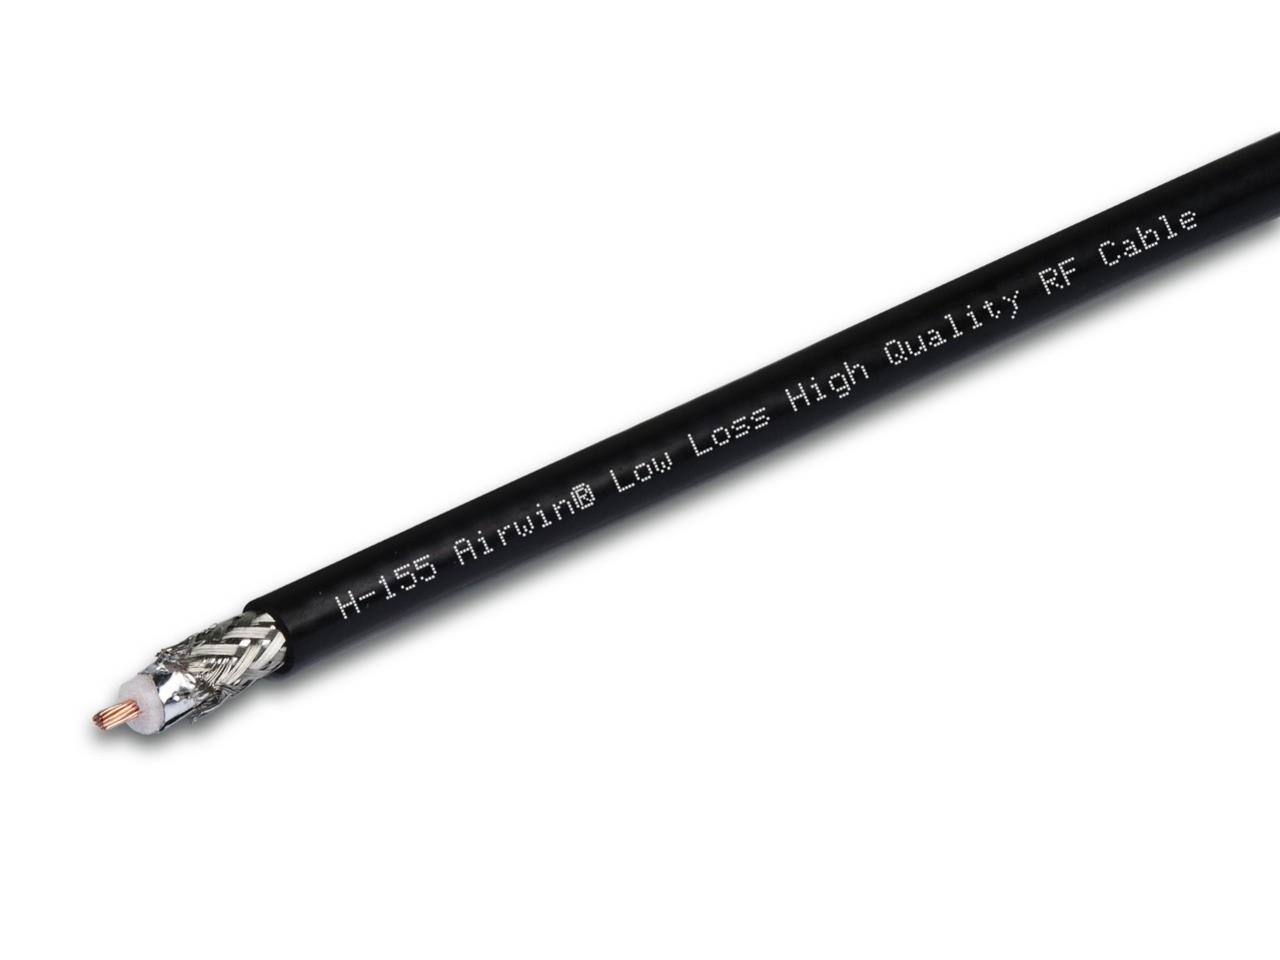 Low Loss HF Coaxcable; 48 db/100m for 2,4GHz, Meterware